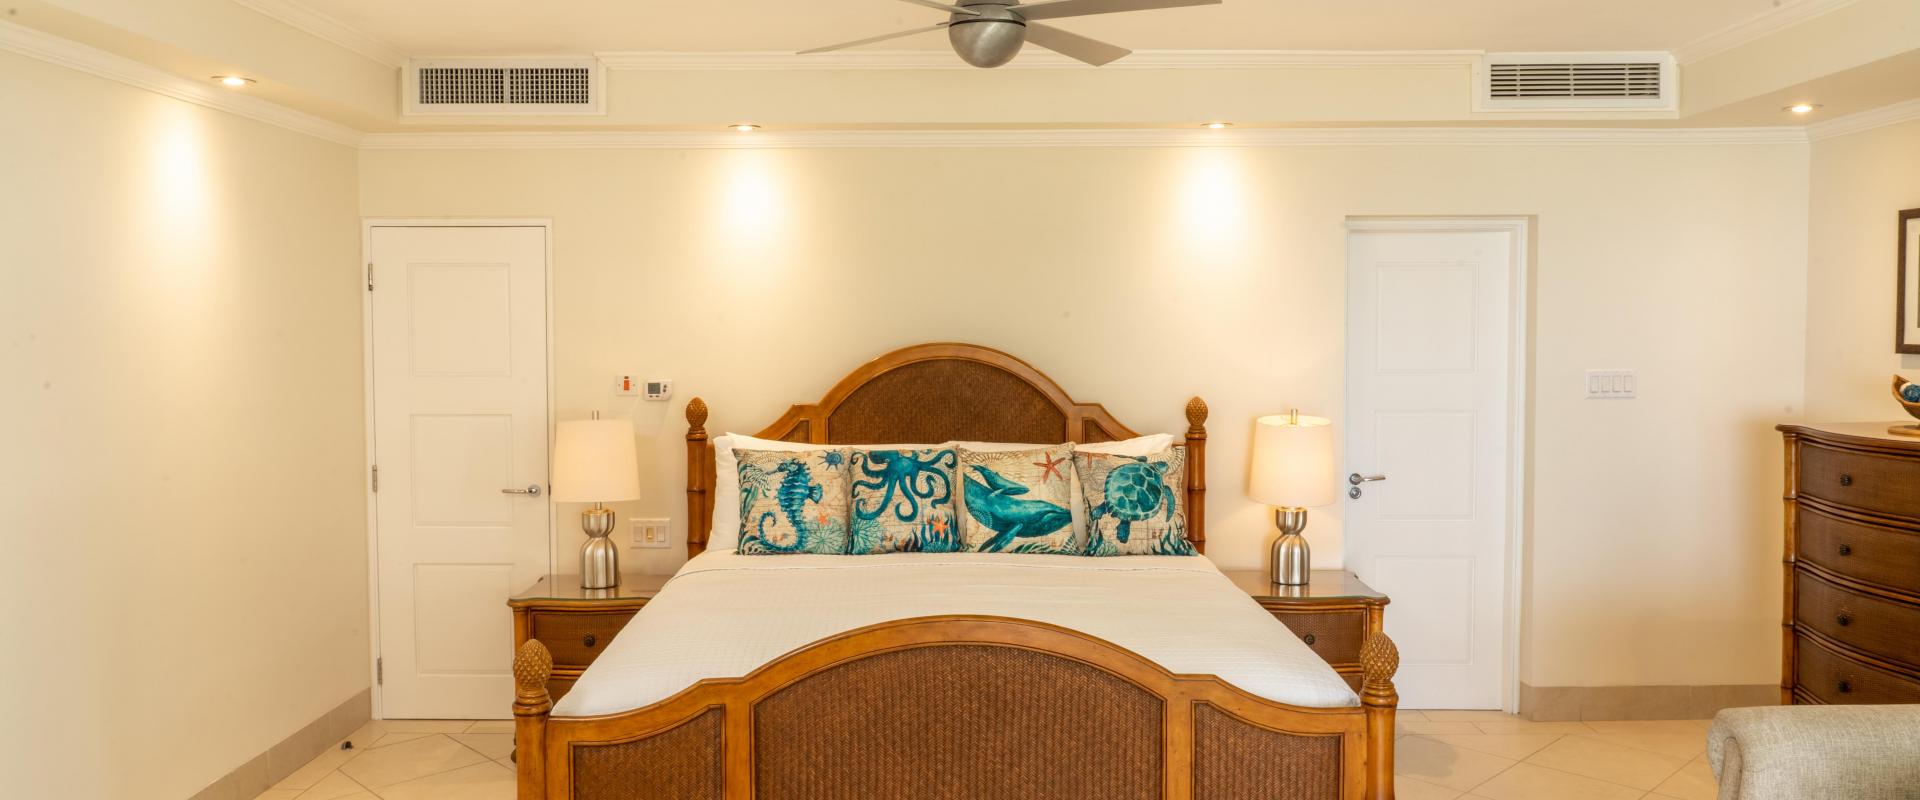 Beachfront Holiday Rental Barbados Palm Beach 410 Master Bedroom King Bed